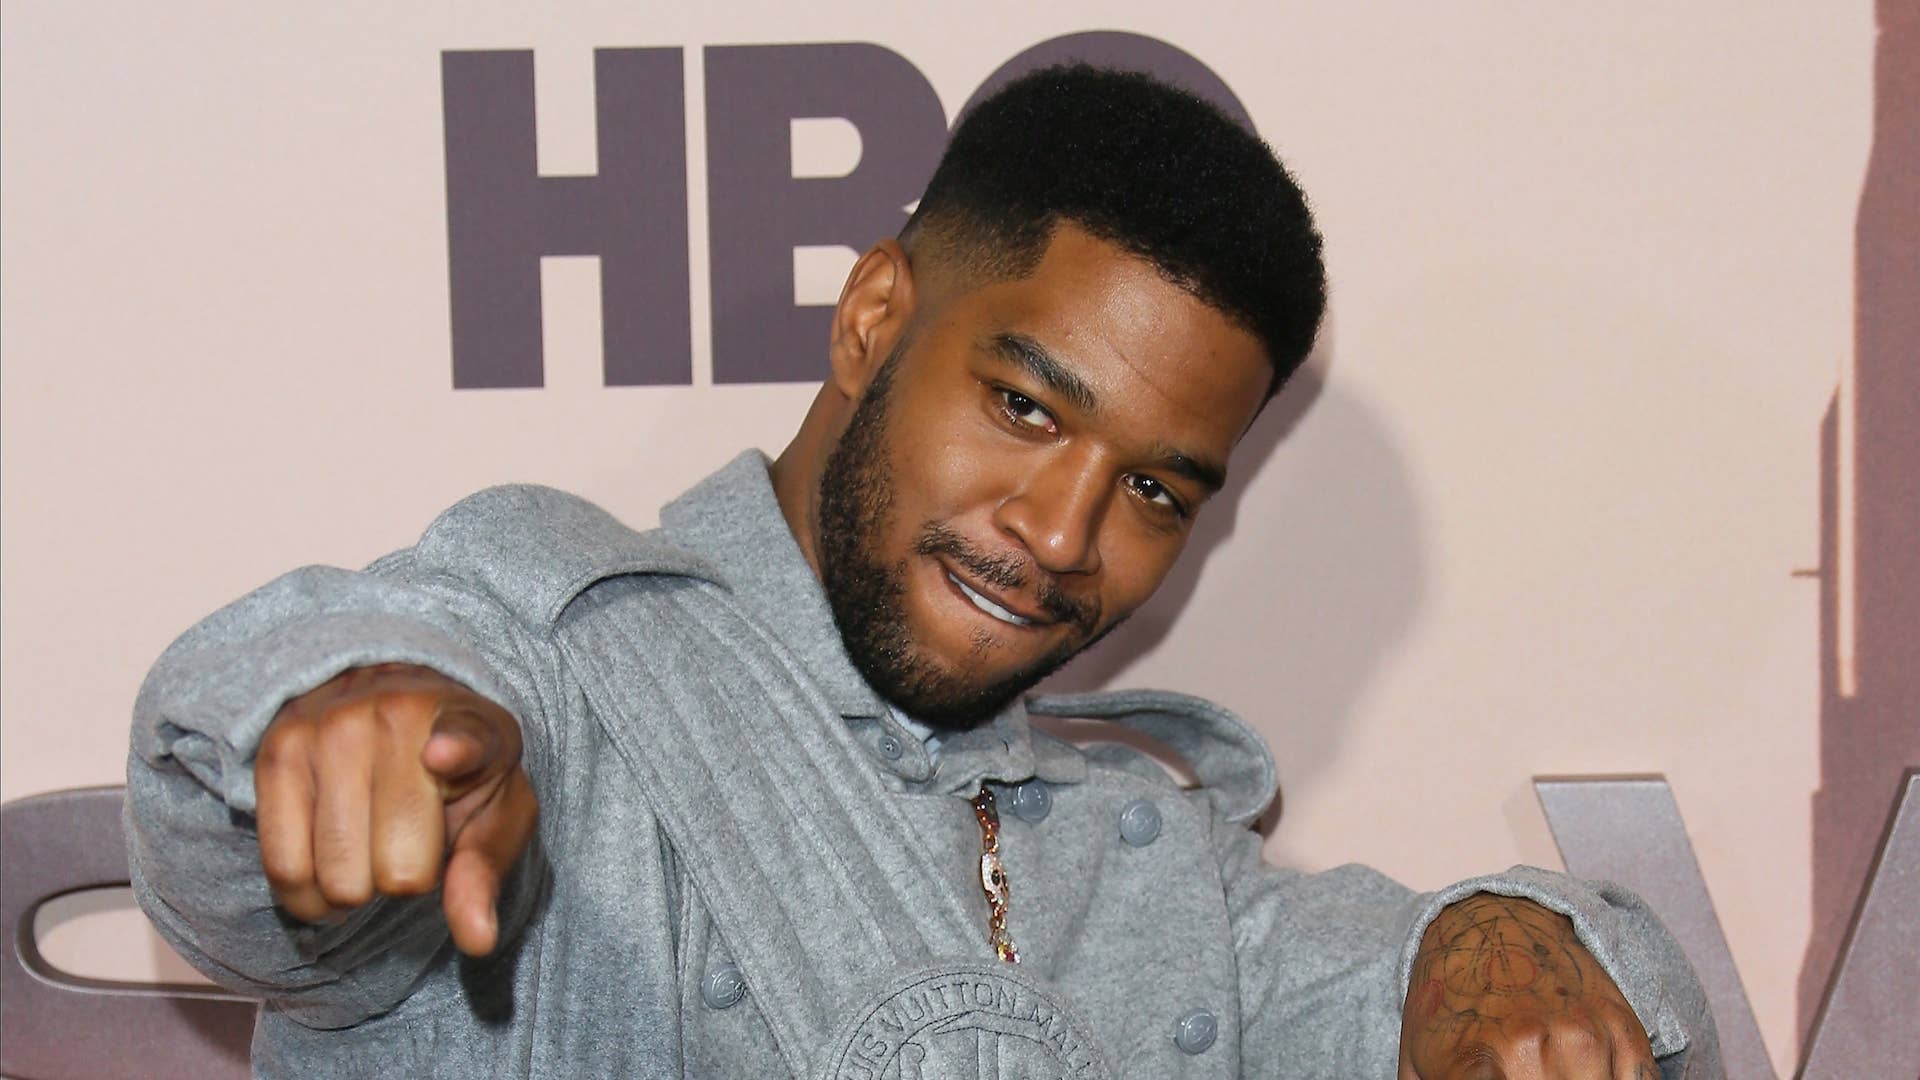 Kid Cudi attends the Premiere of HBO's "Westworld" Season 3 at TCL Chinese Theatre